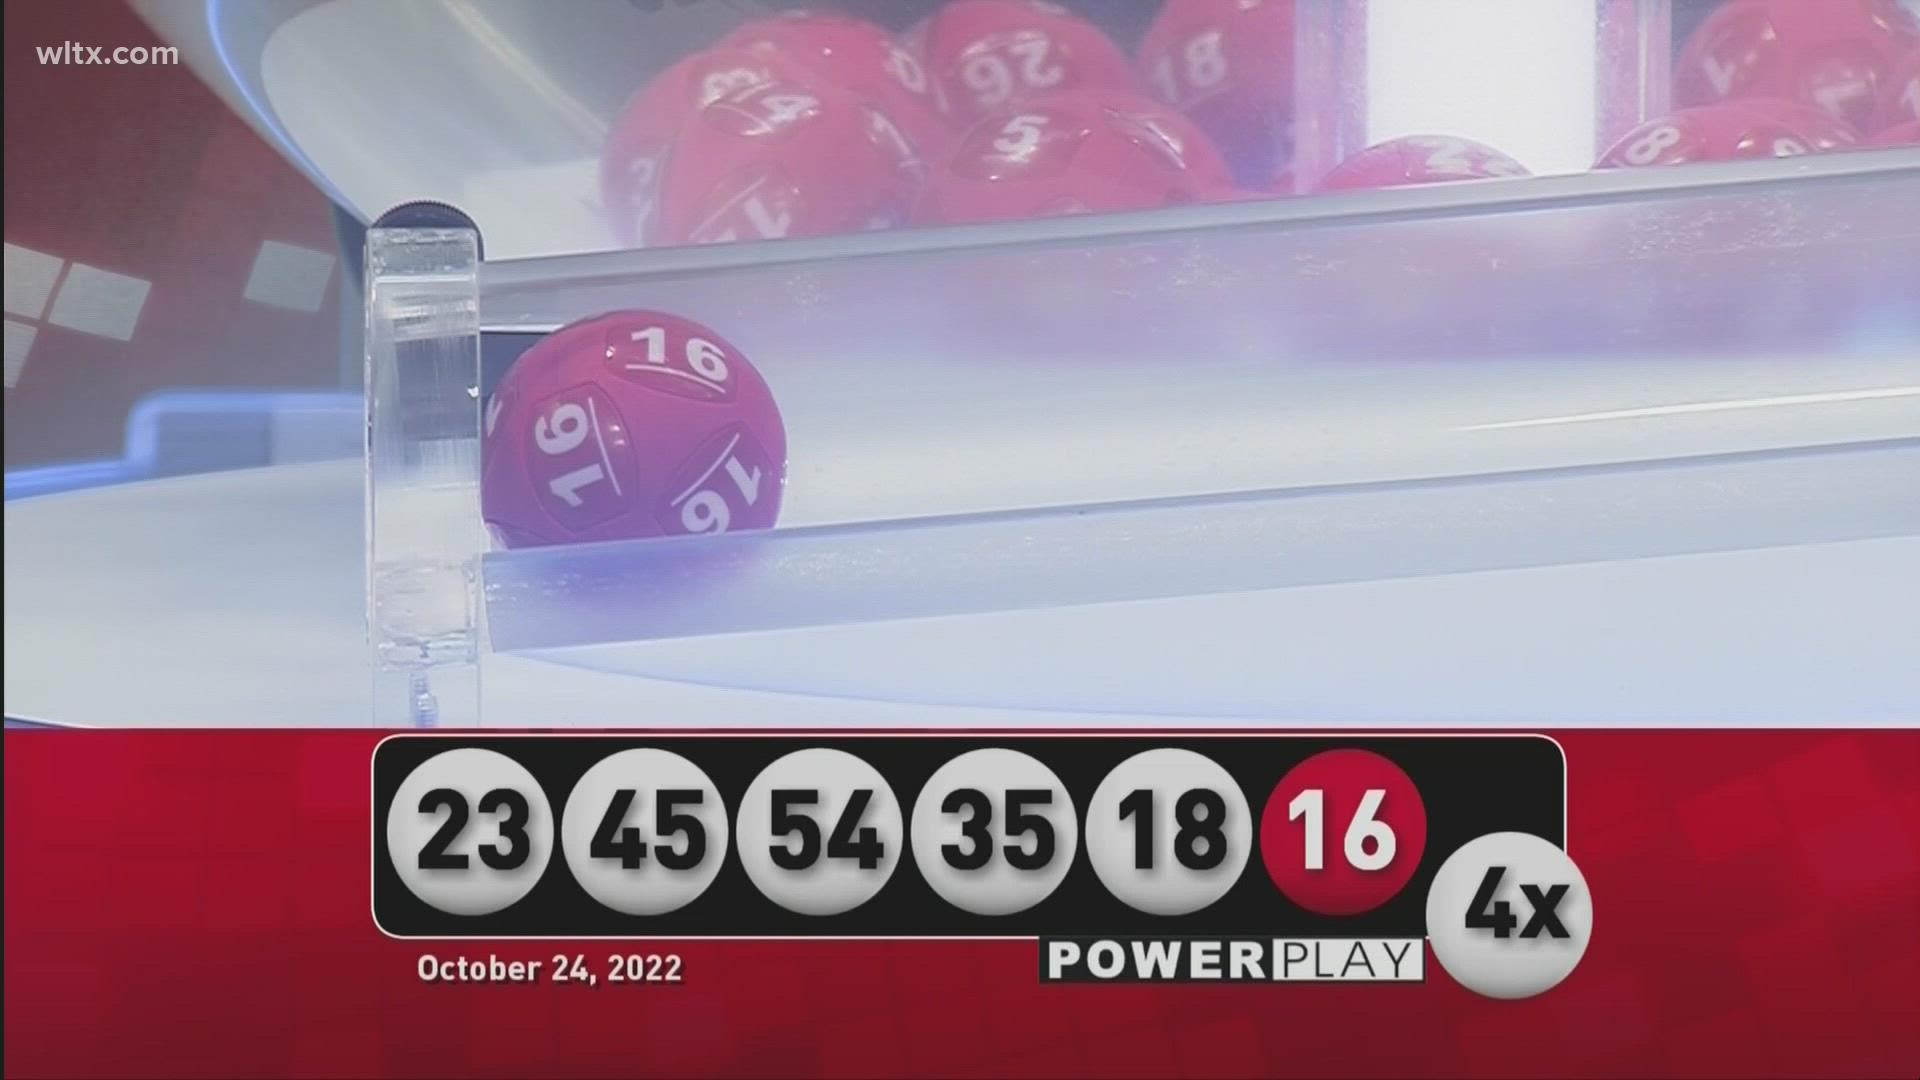 Here are the winning Powerball numbers for October 24, 2022.